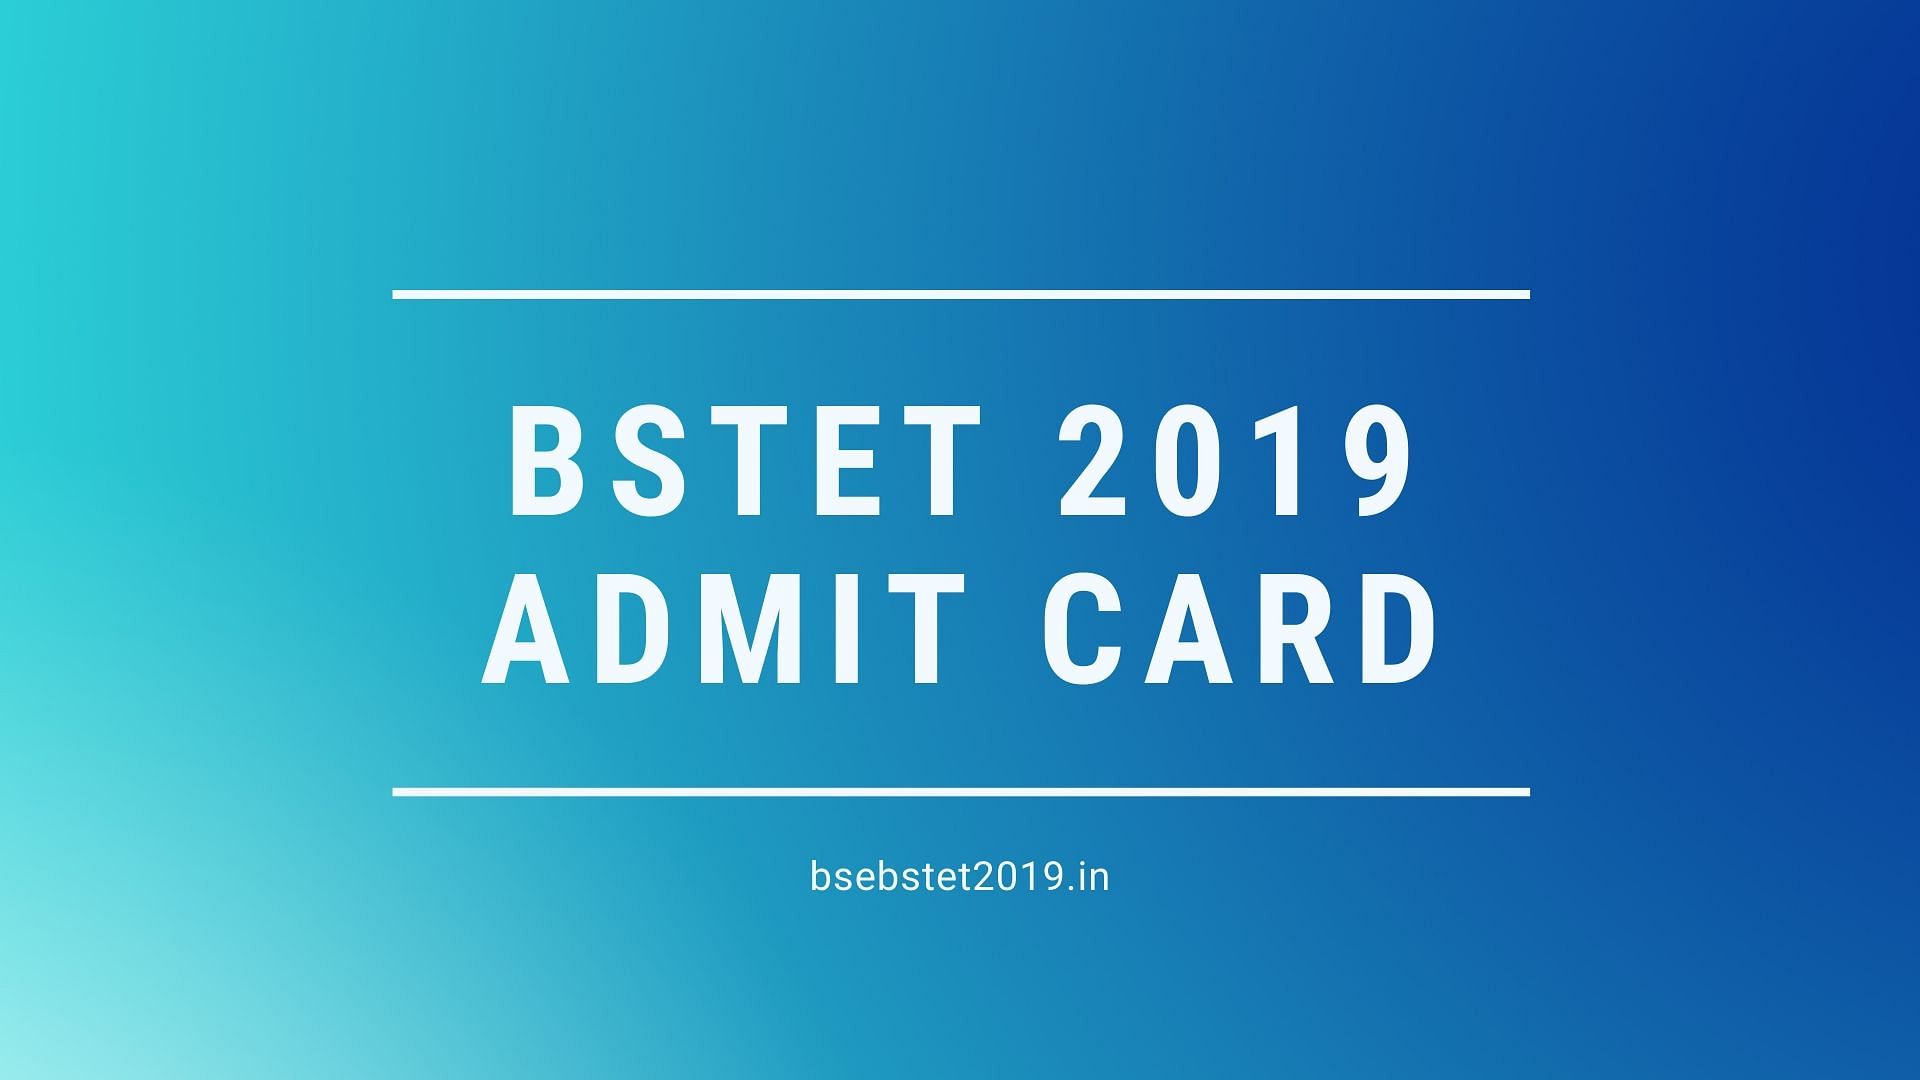 BSTET 2019 Admit Card Available on official website at bsebstet2019.in